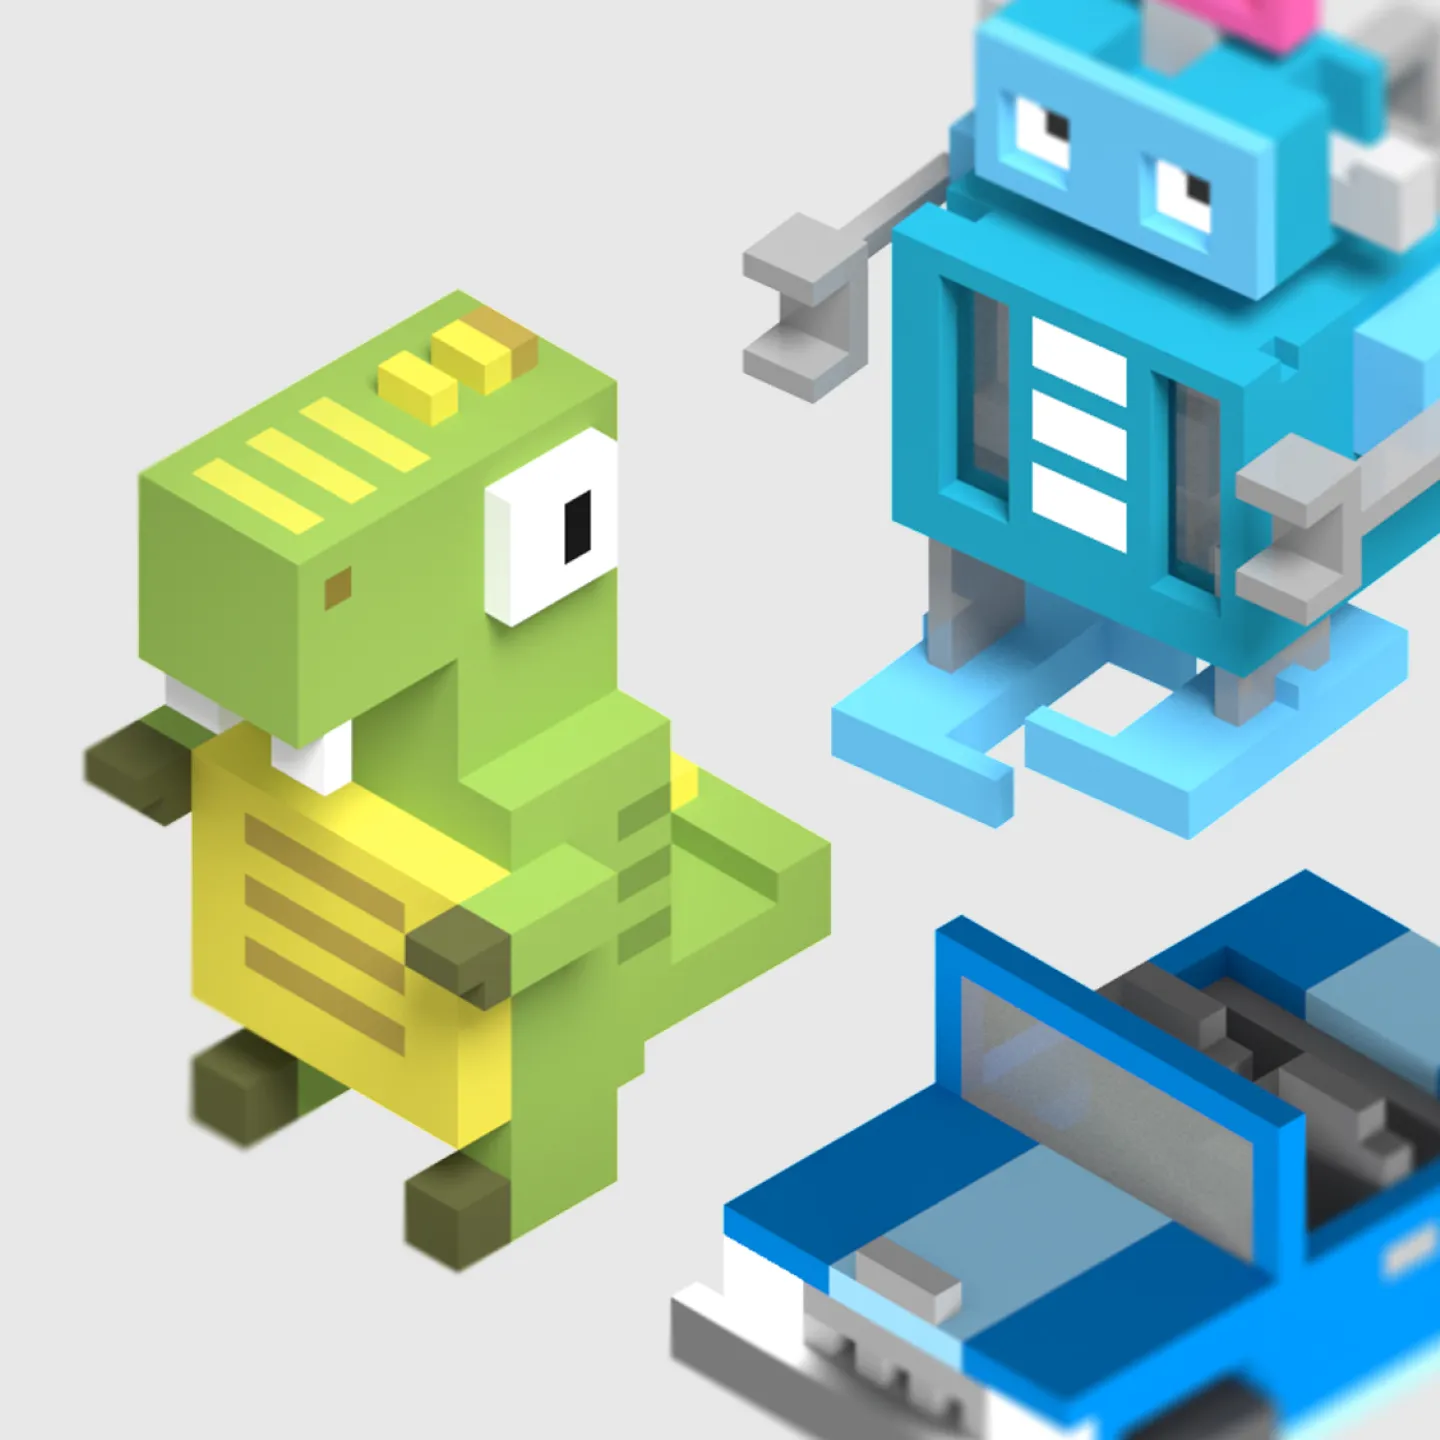 Isometric illustrations of a dinosaur, car, and robot